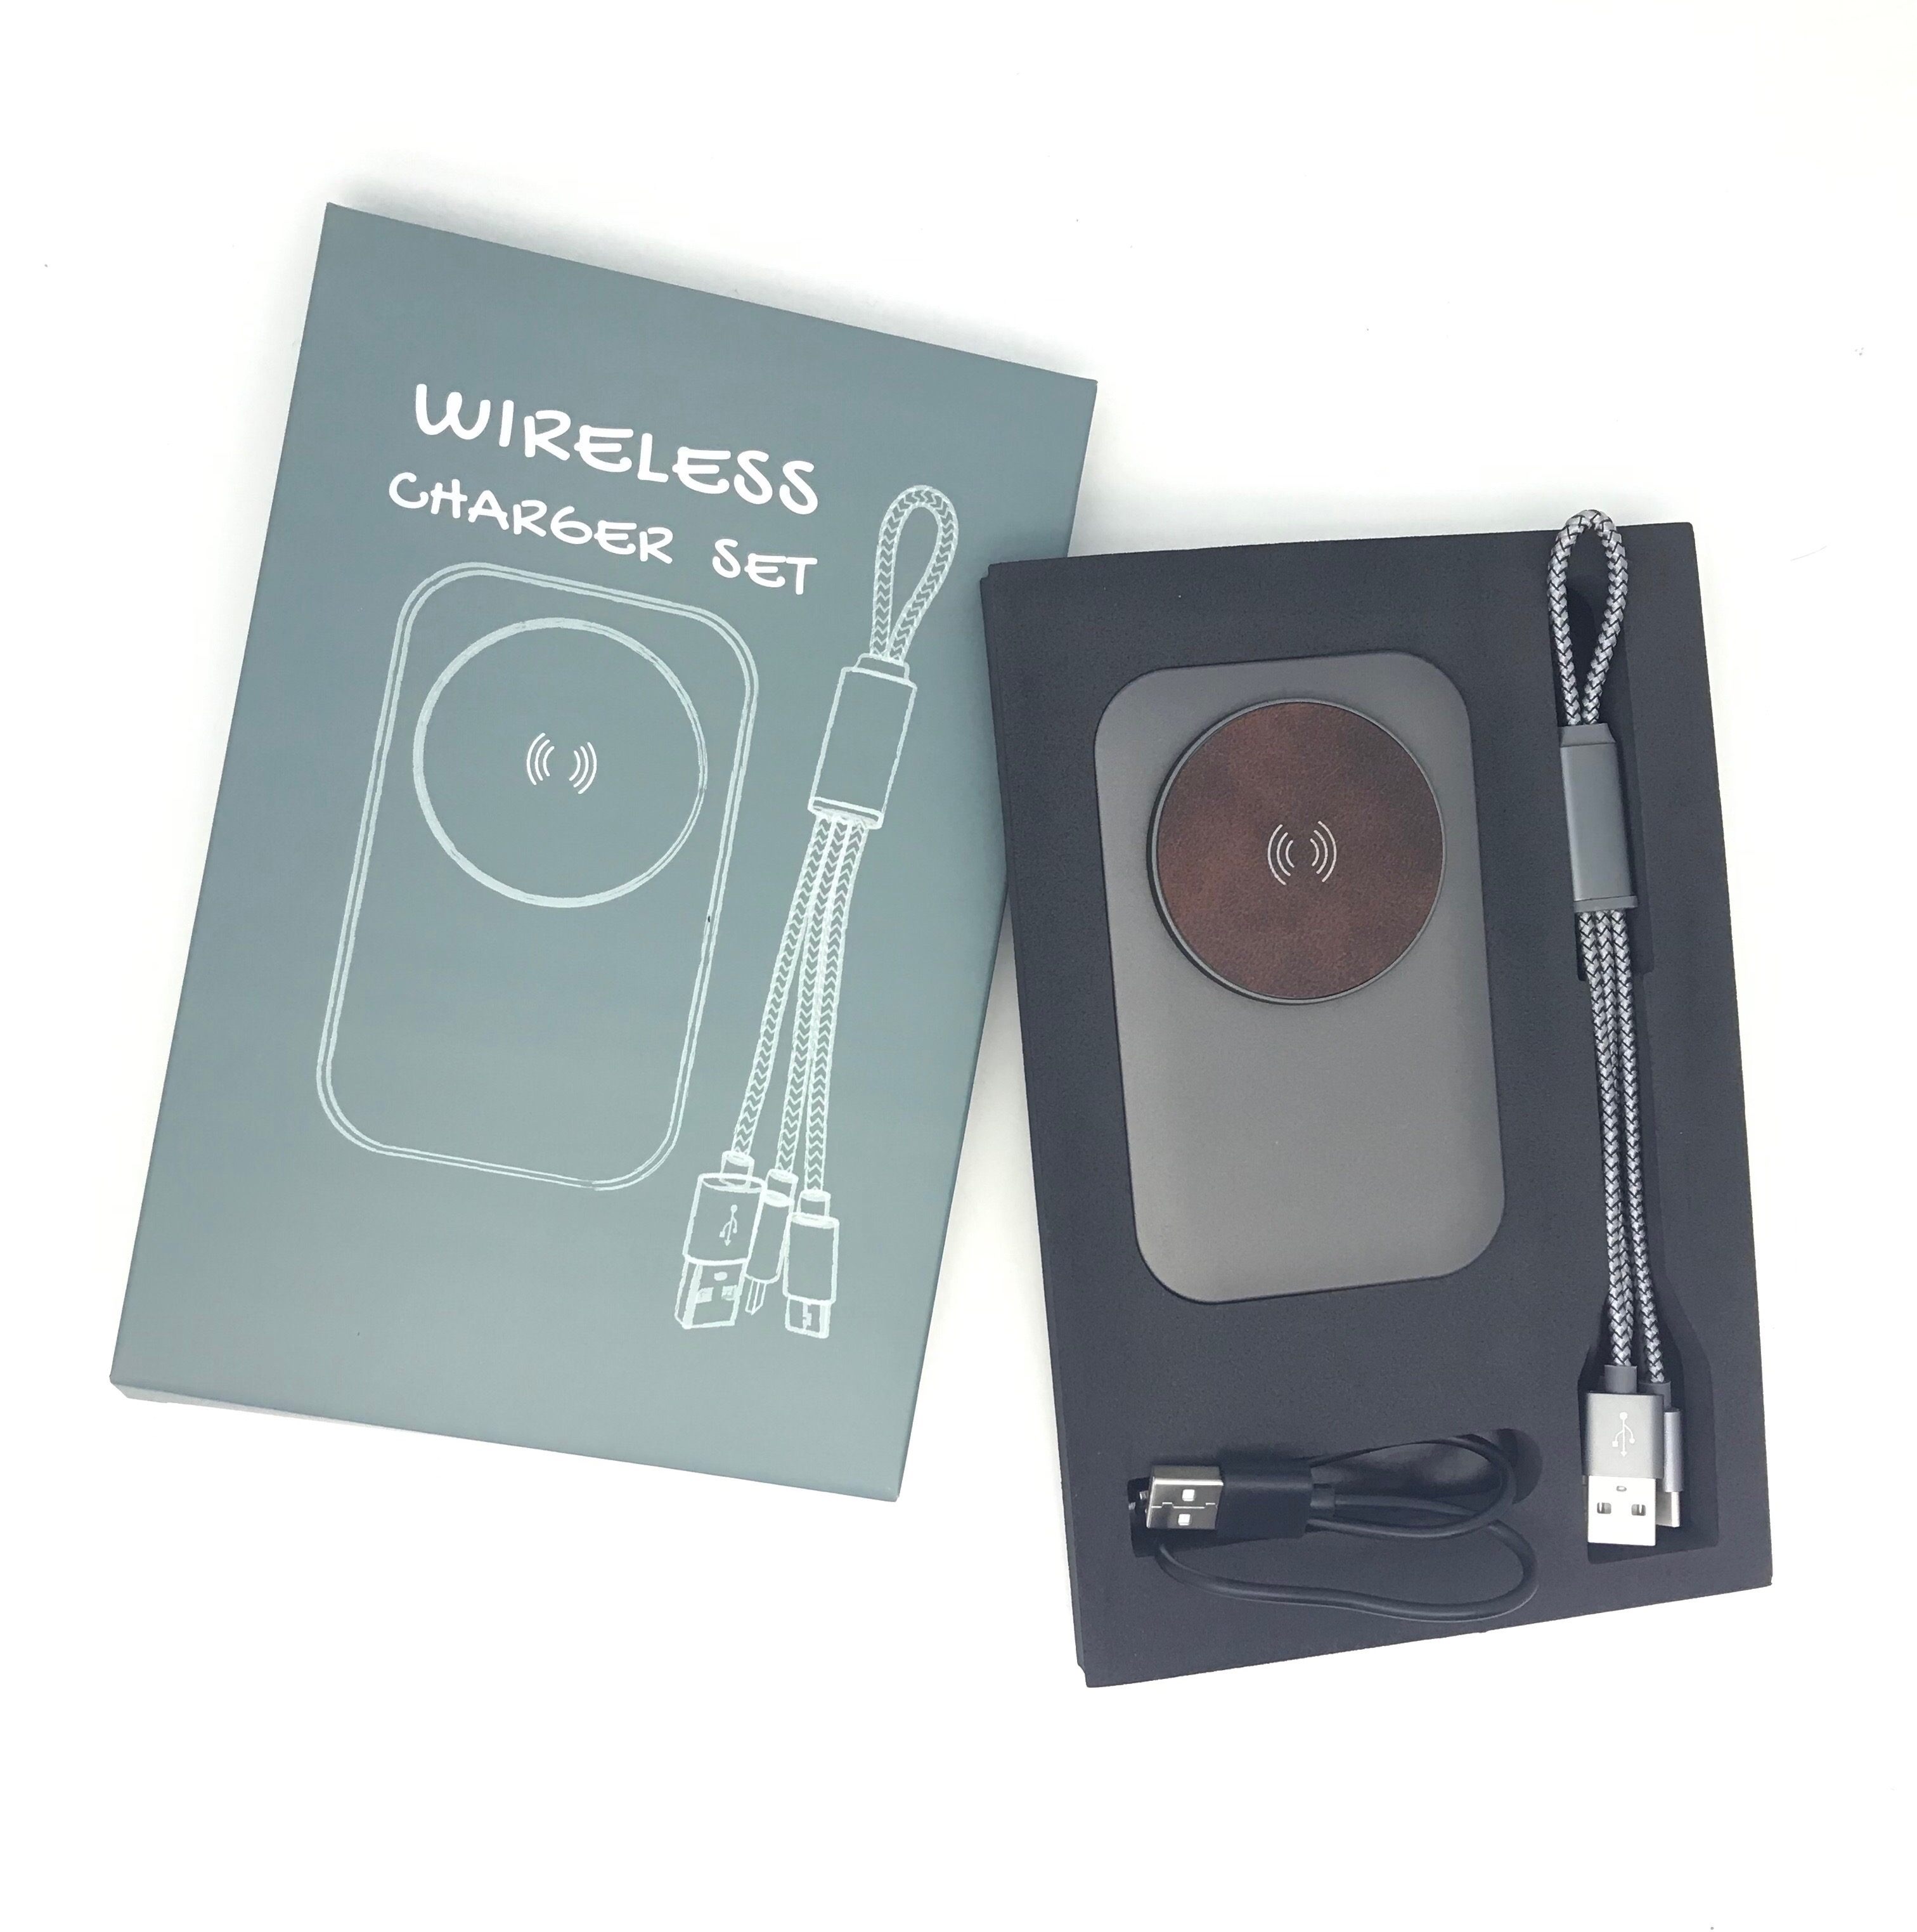 WIRELESS CHARGER SET